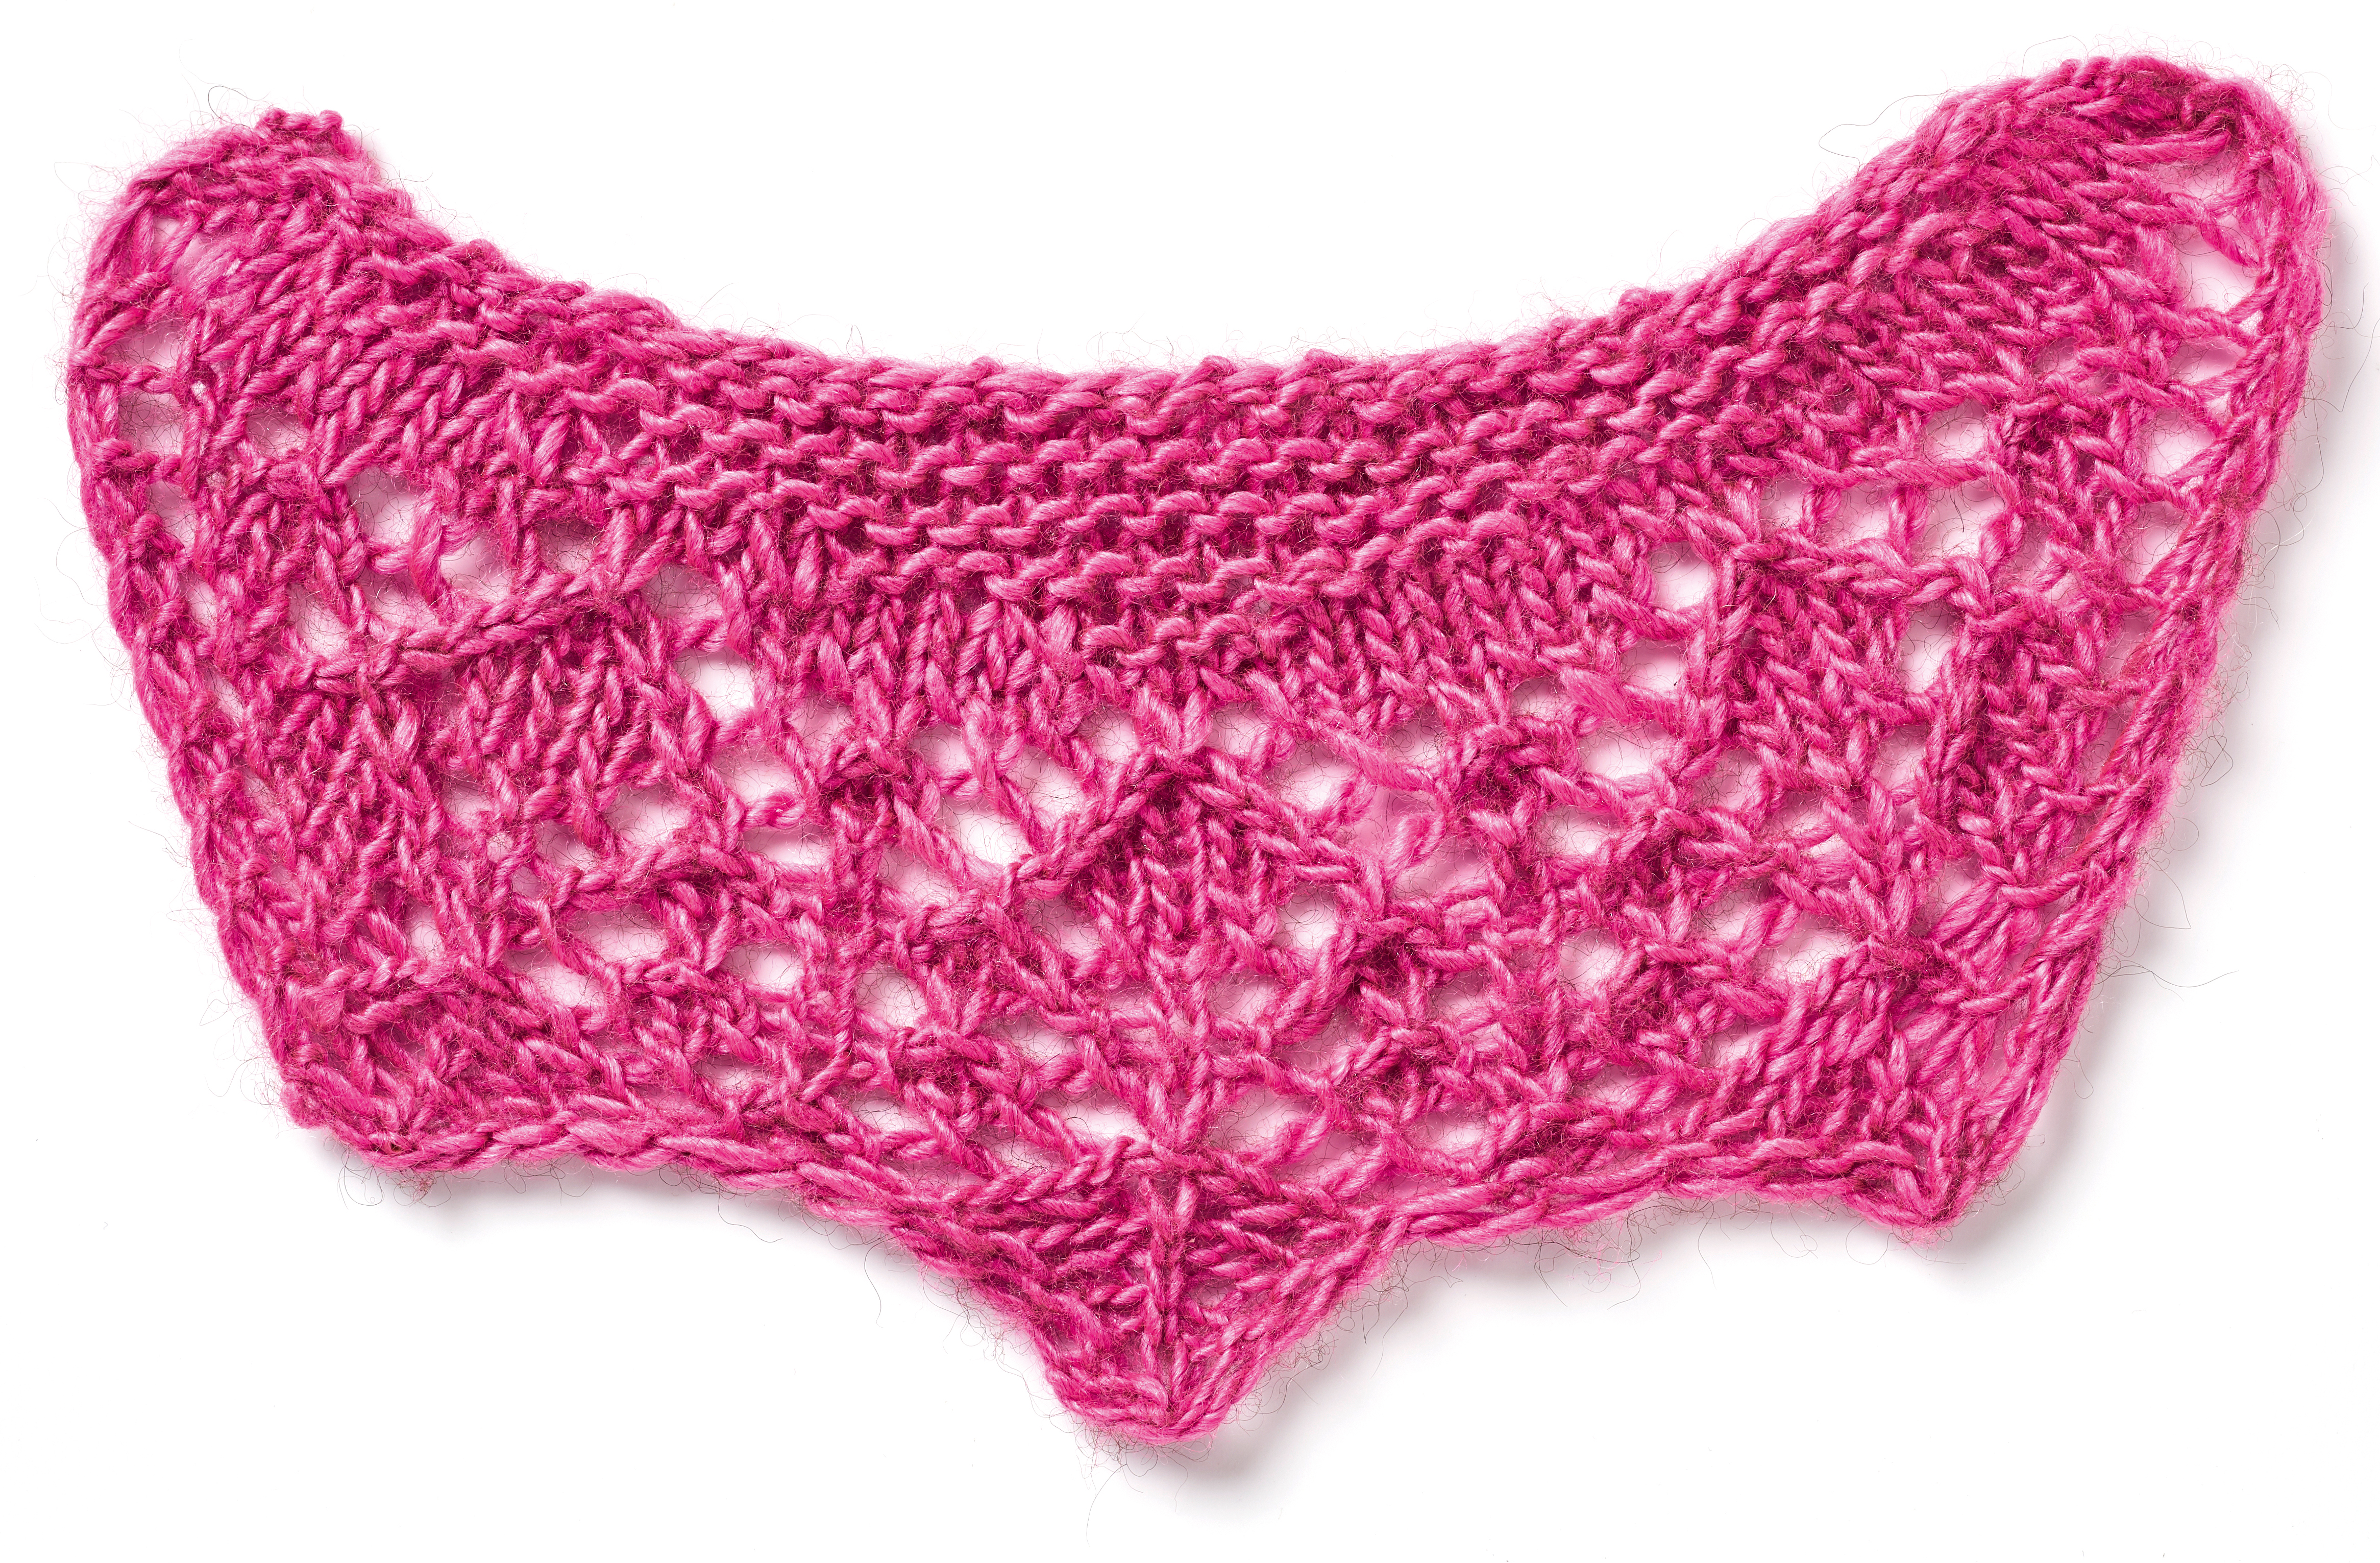 Swatch for a shawl design